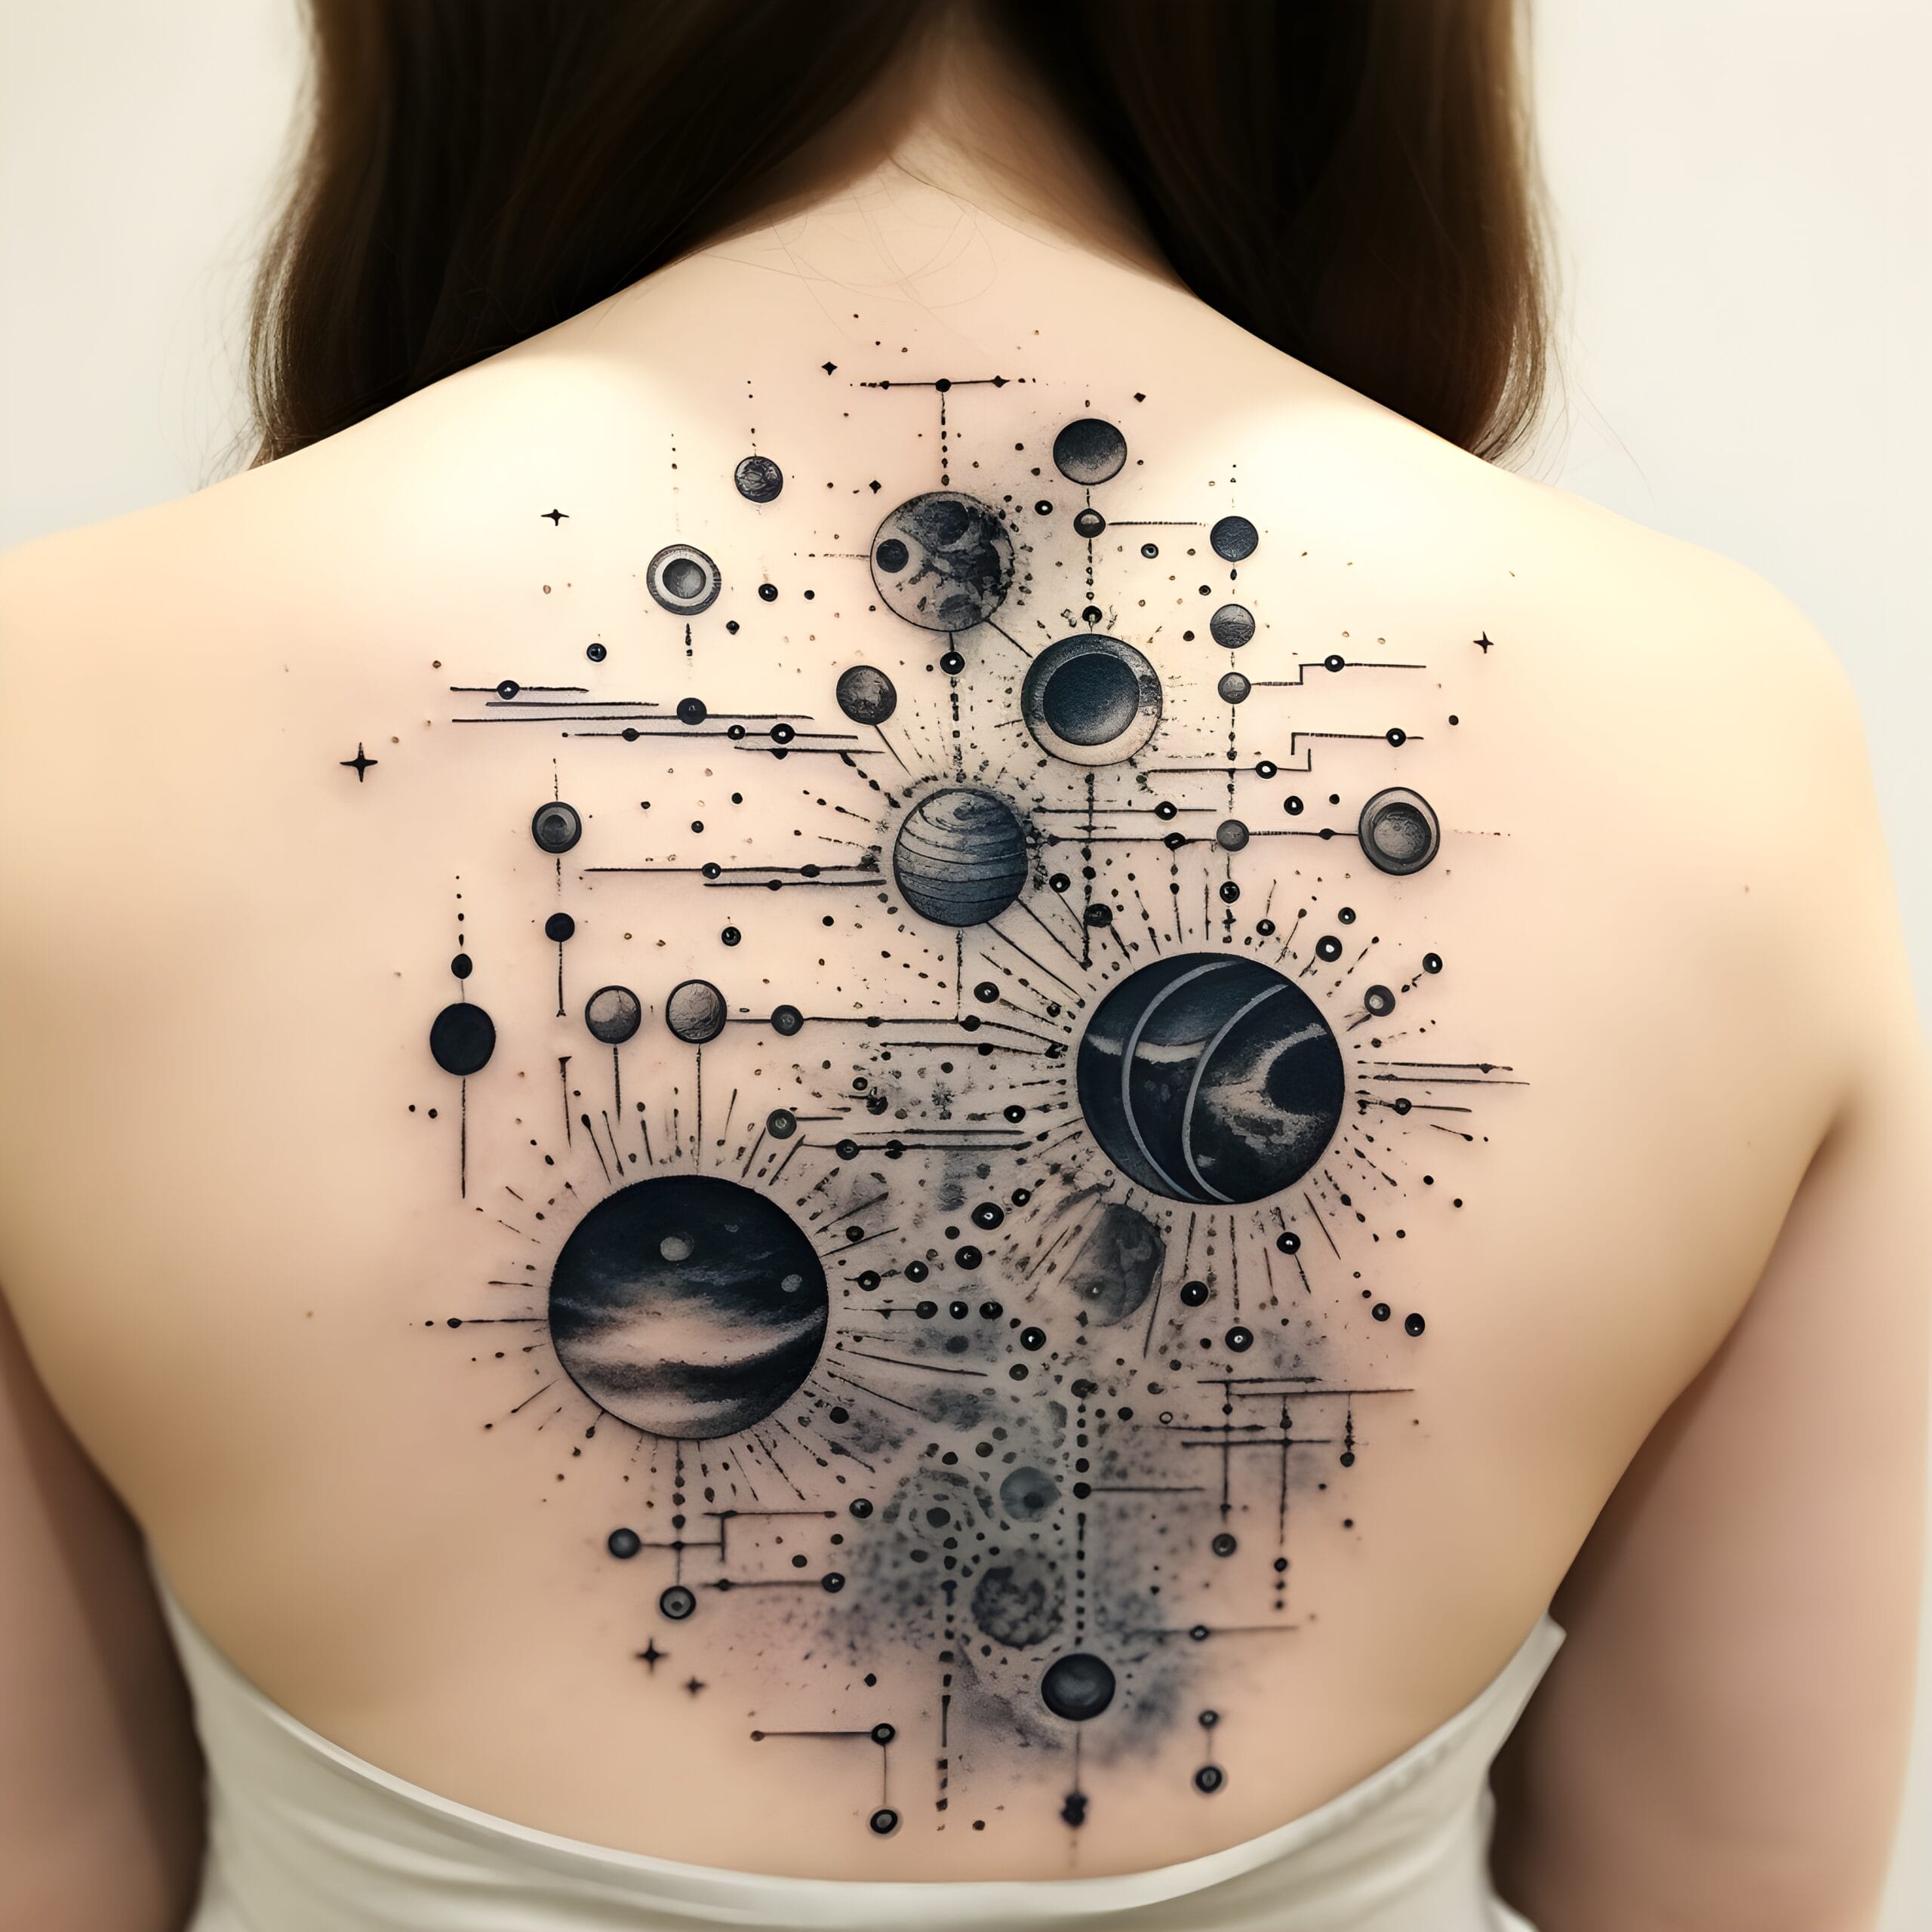 A woman's back adorned with a celestial tattoo of planets and stars in the comfort of her home.